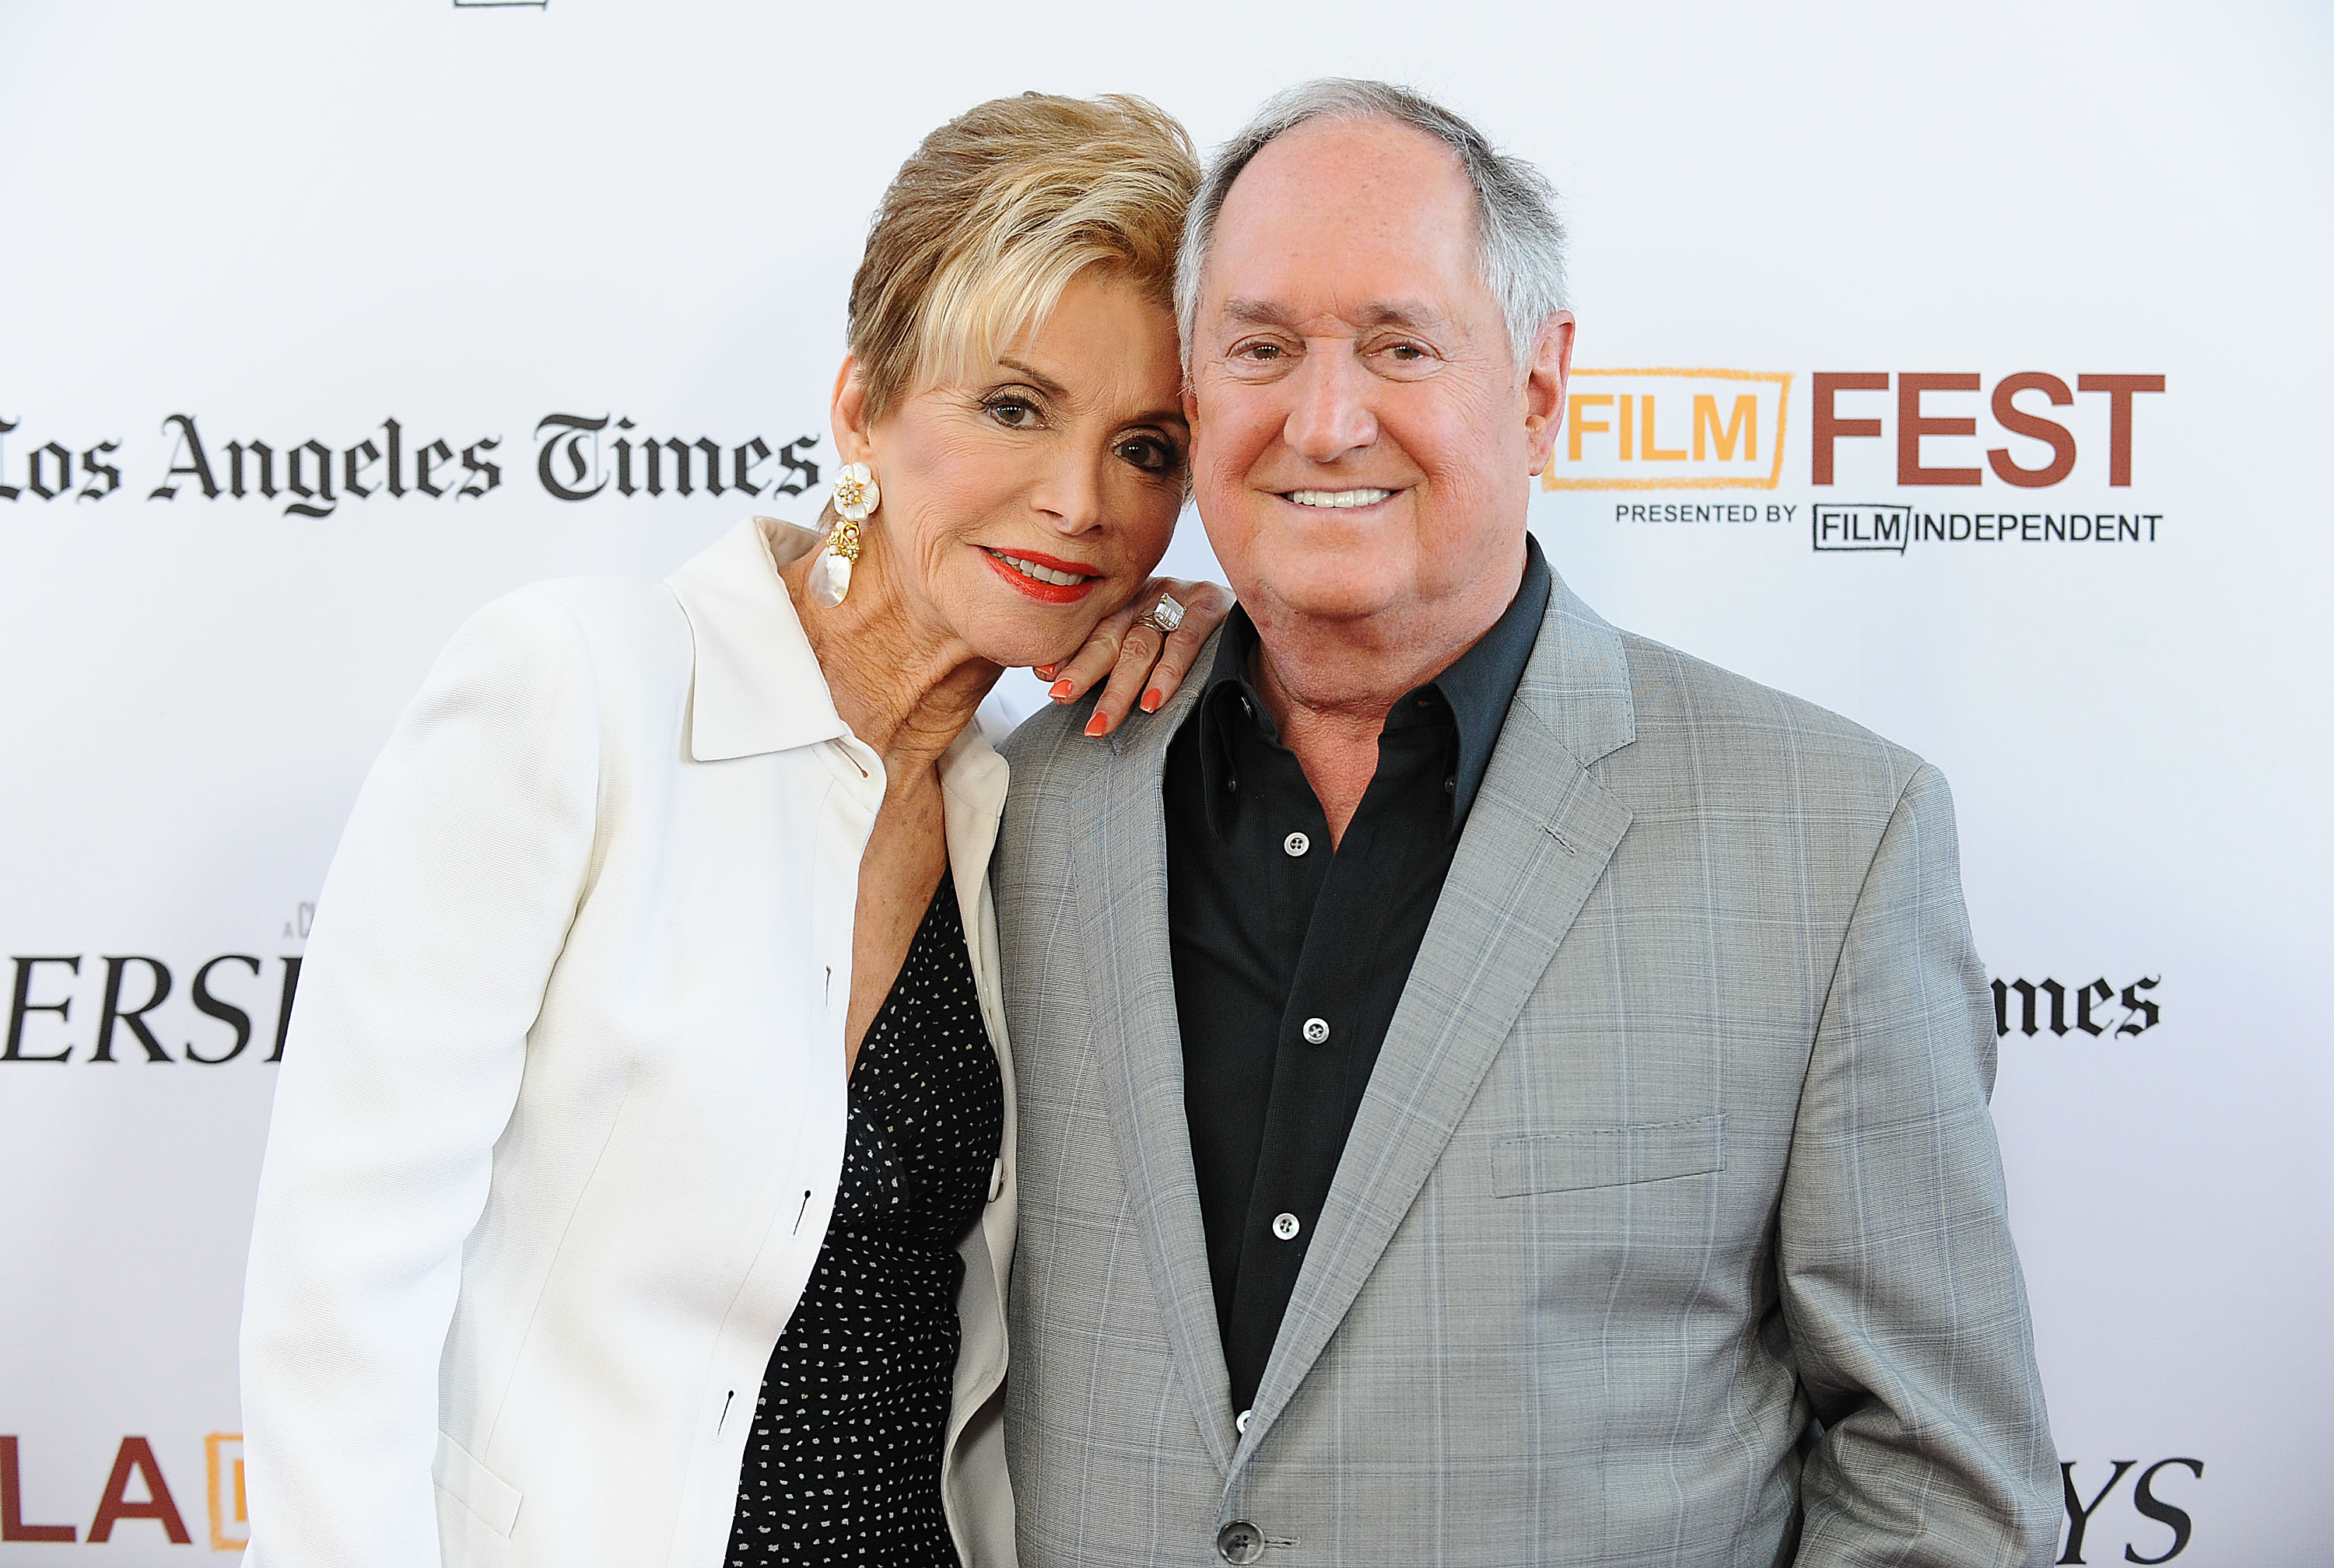 Leba Strassberg and Neil Sedaka at the "Jersey Boys" closing night film premiere in Los Angeles, 2014 | Source: Getty Images